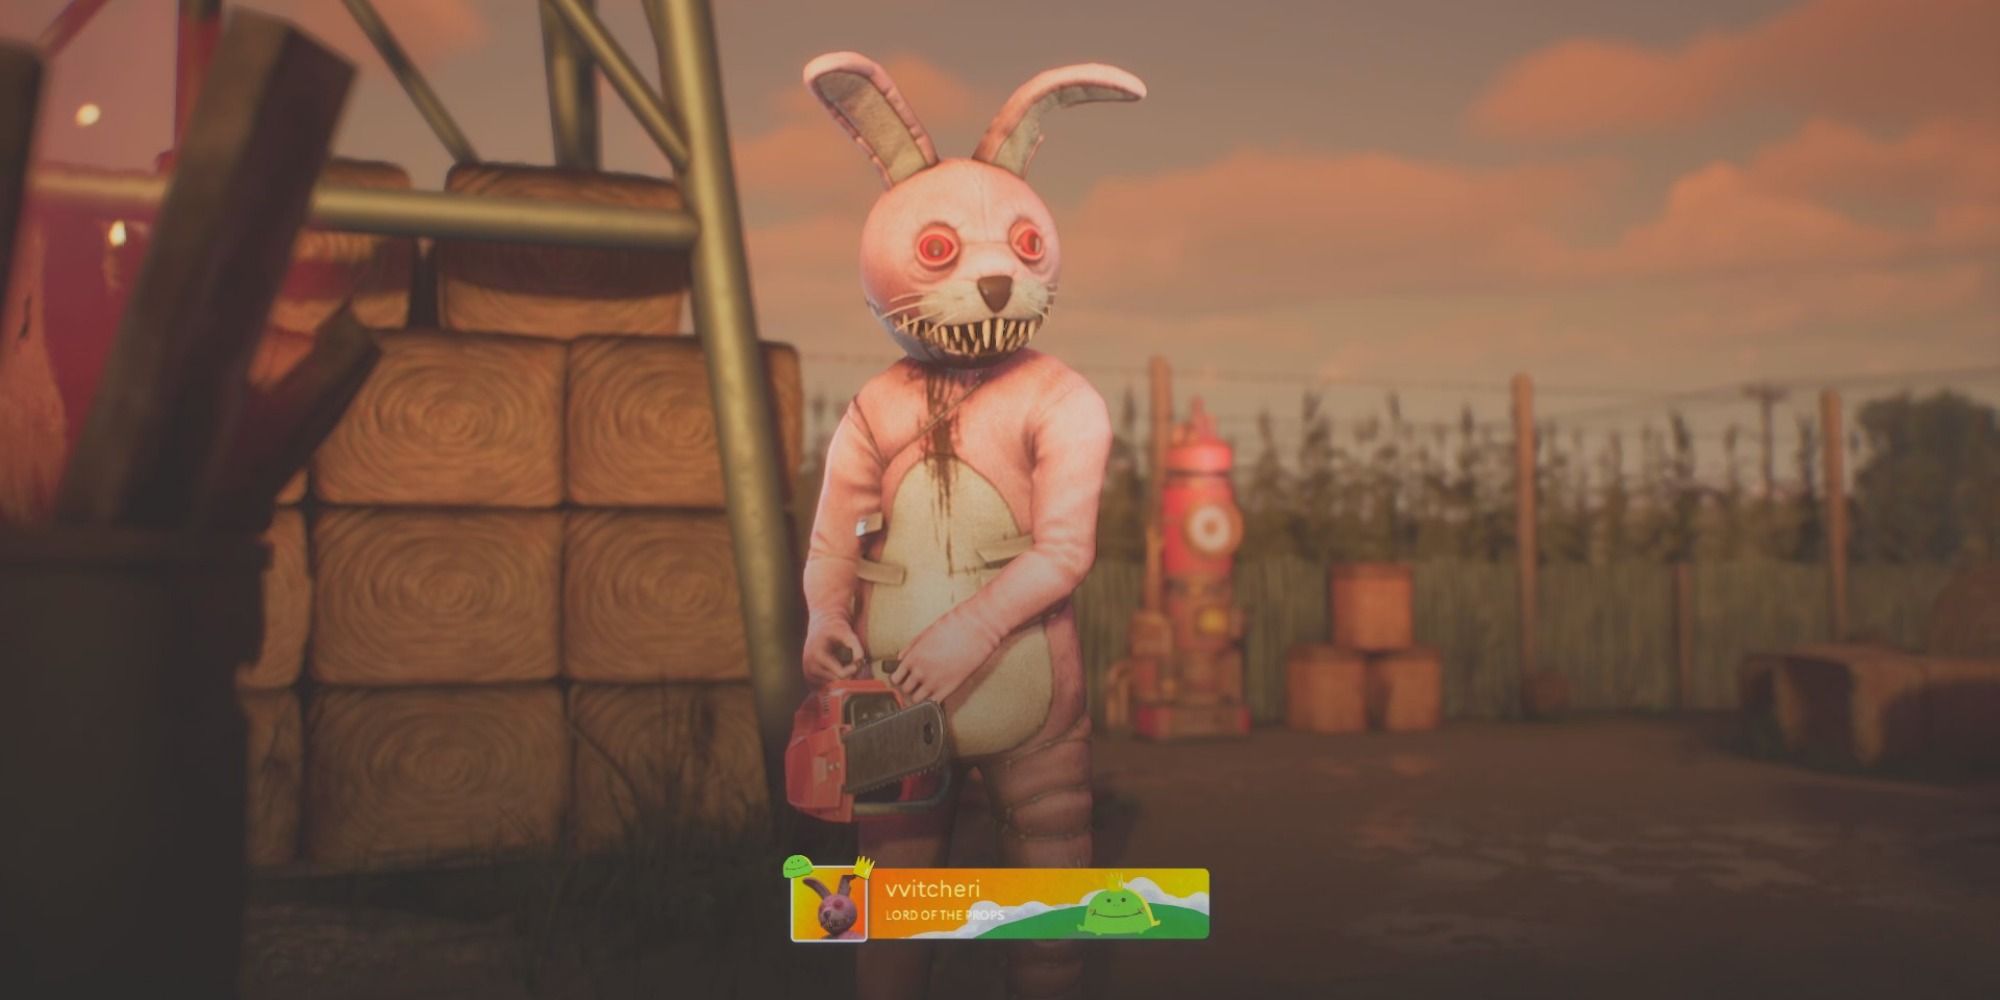 A humanoid creature in a bloodied pink bunny suit with jiggly red eyes stands in a farm, holding a chainsaw